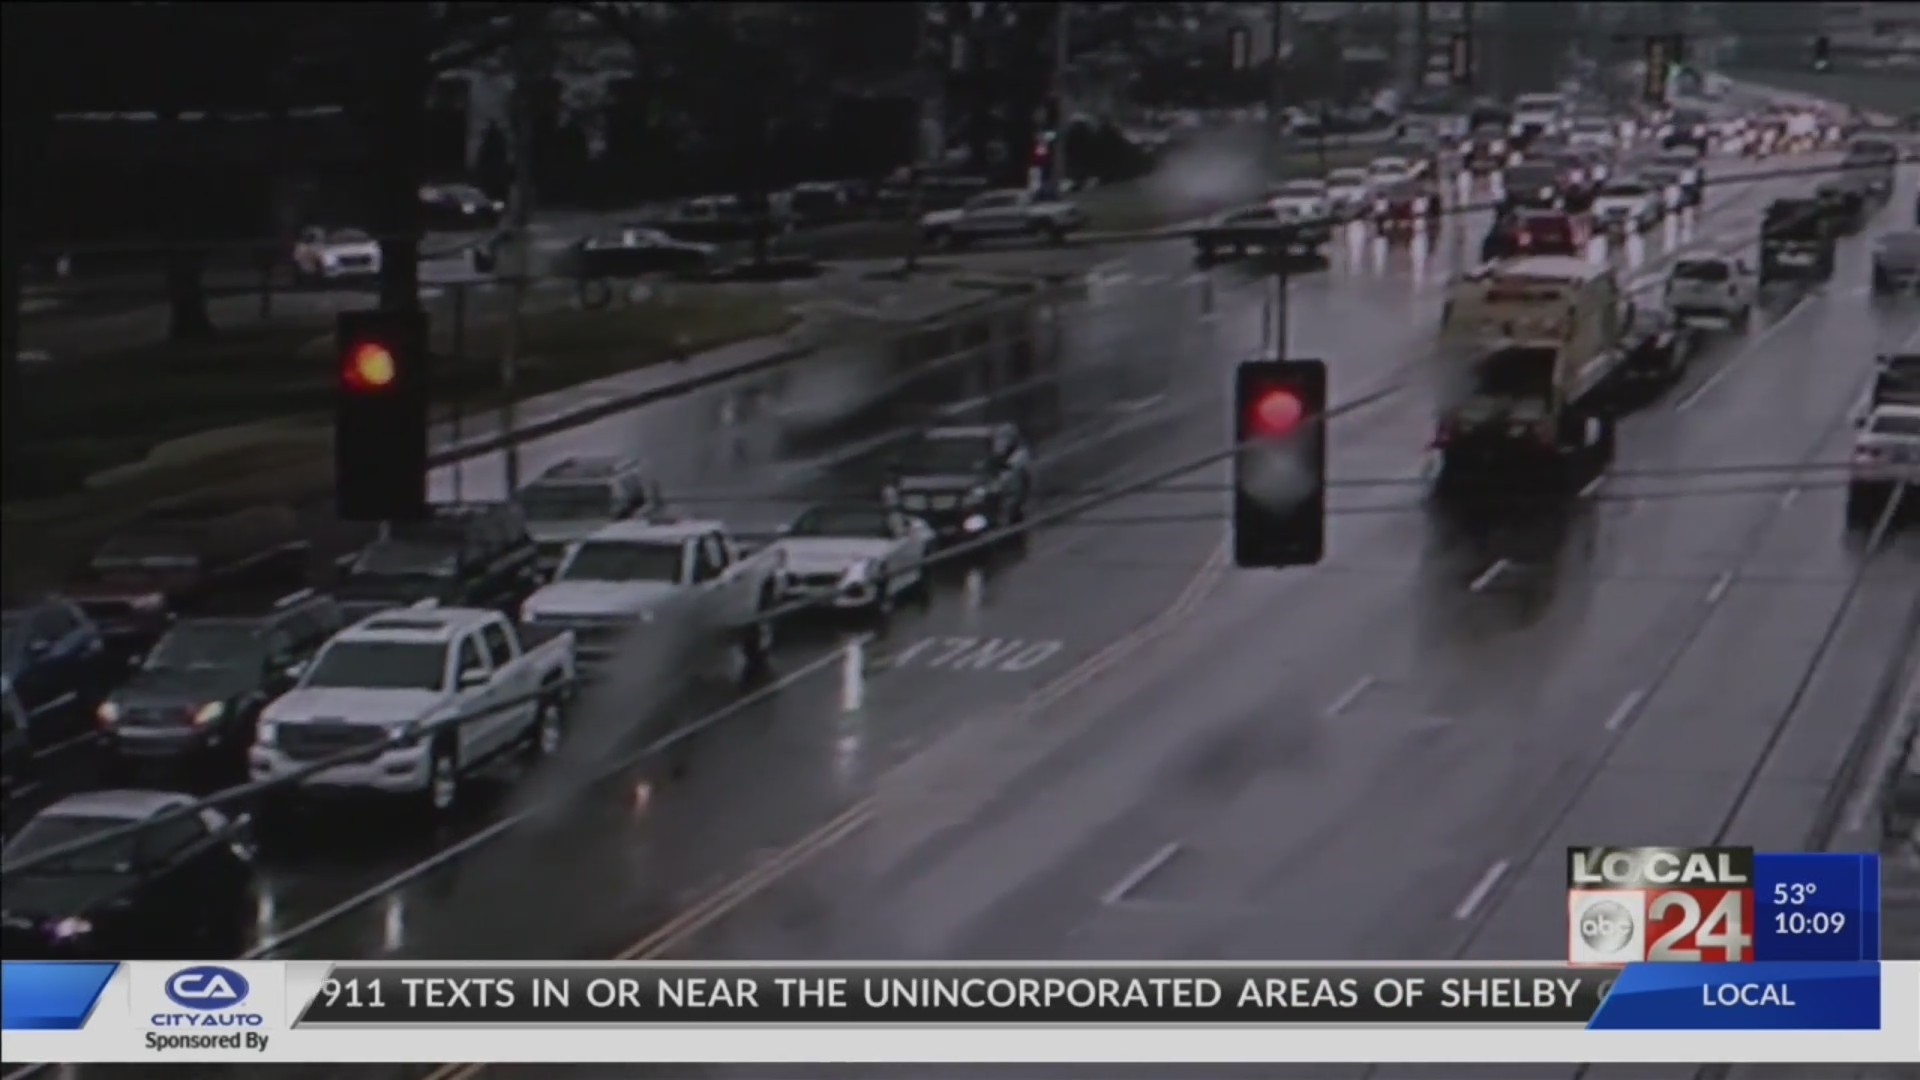 Some traffic lights in Memphis ARE synchronized, despite claims to the contrary | VERIFY